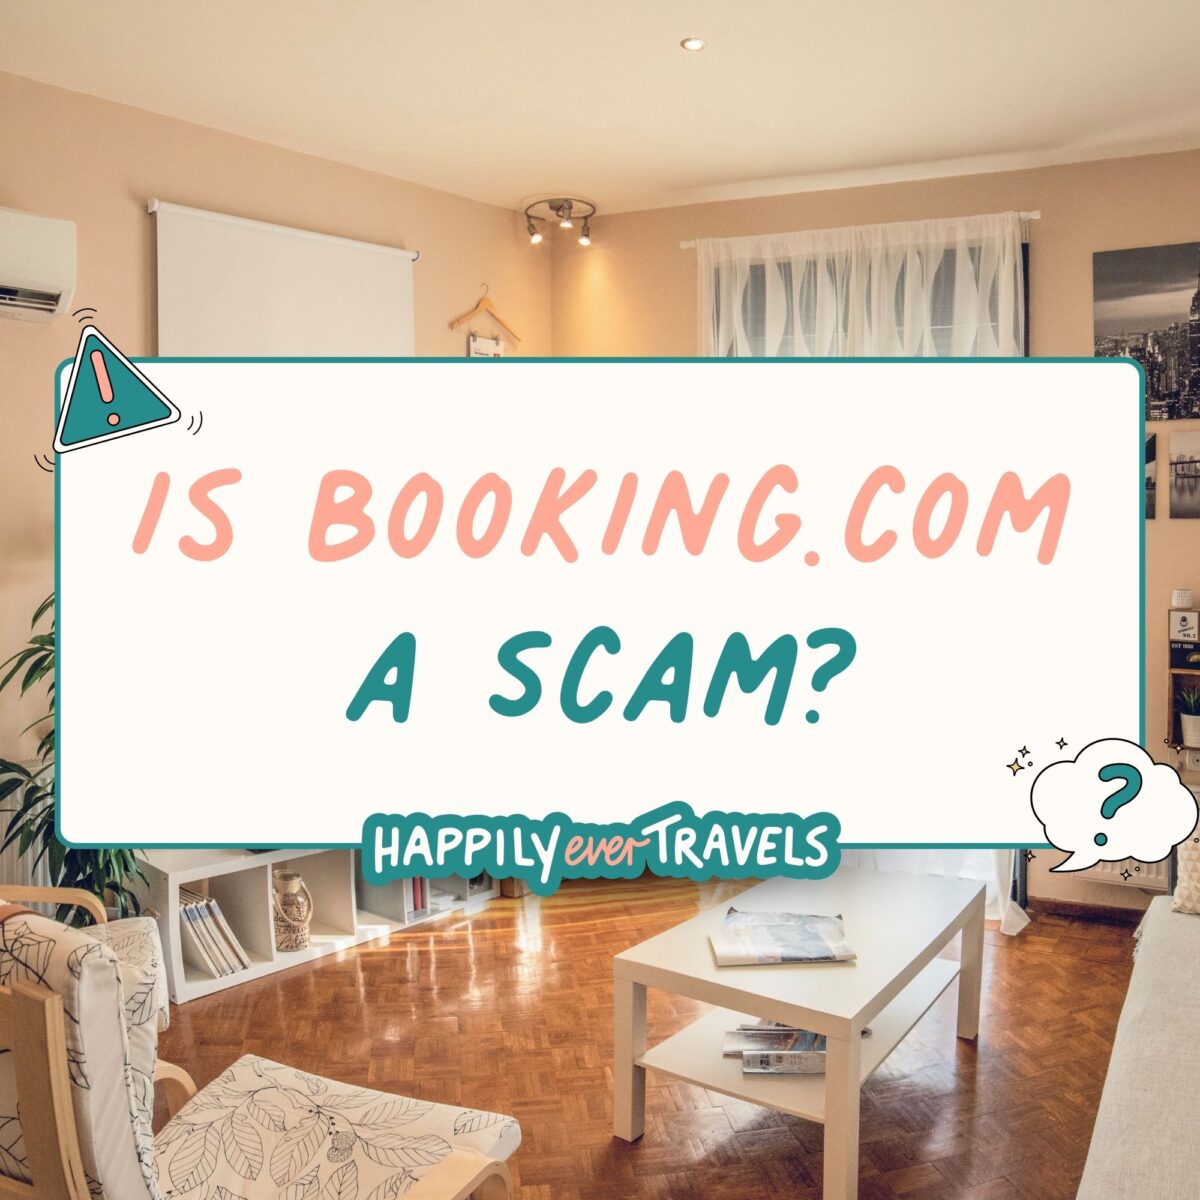 Is Booking.com a Scam? Why You Shouldn’t Trust Them